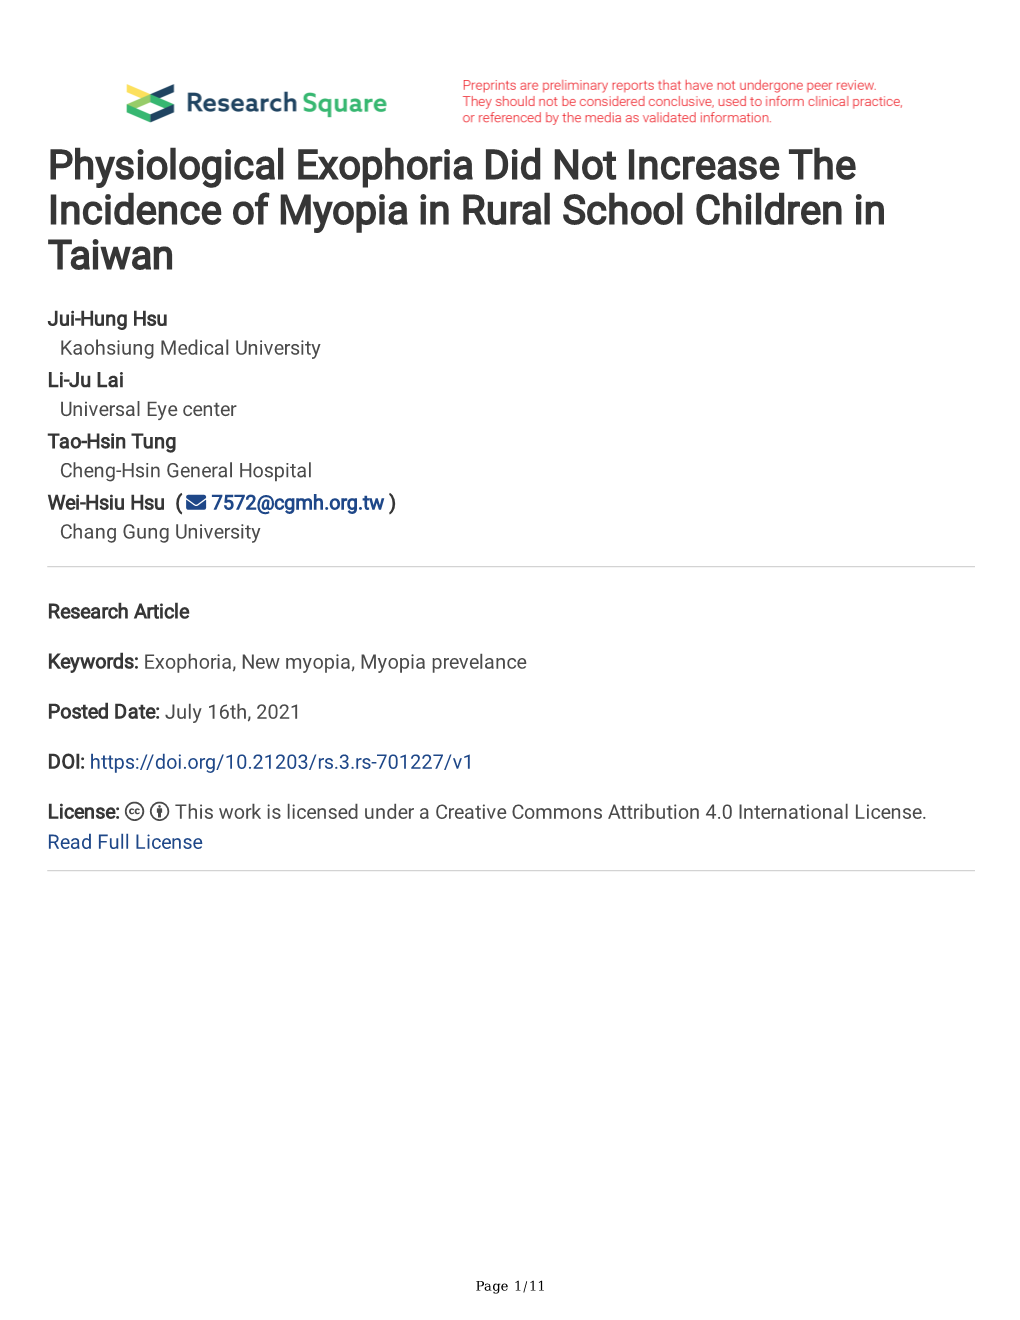 Physiological Exophoria Did Not Increase the Incidence of Myopia in Rural School Children in Taiwan